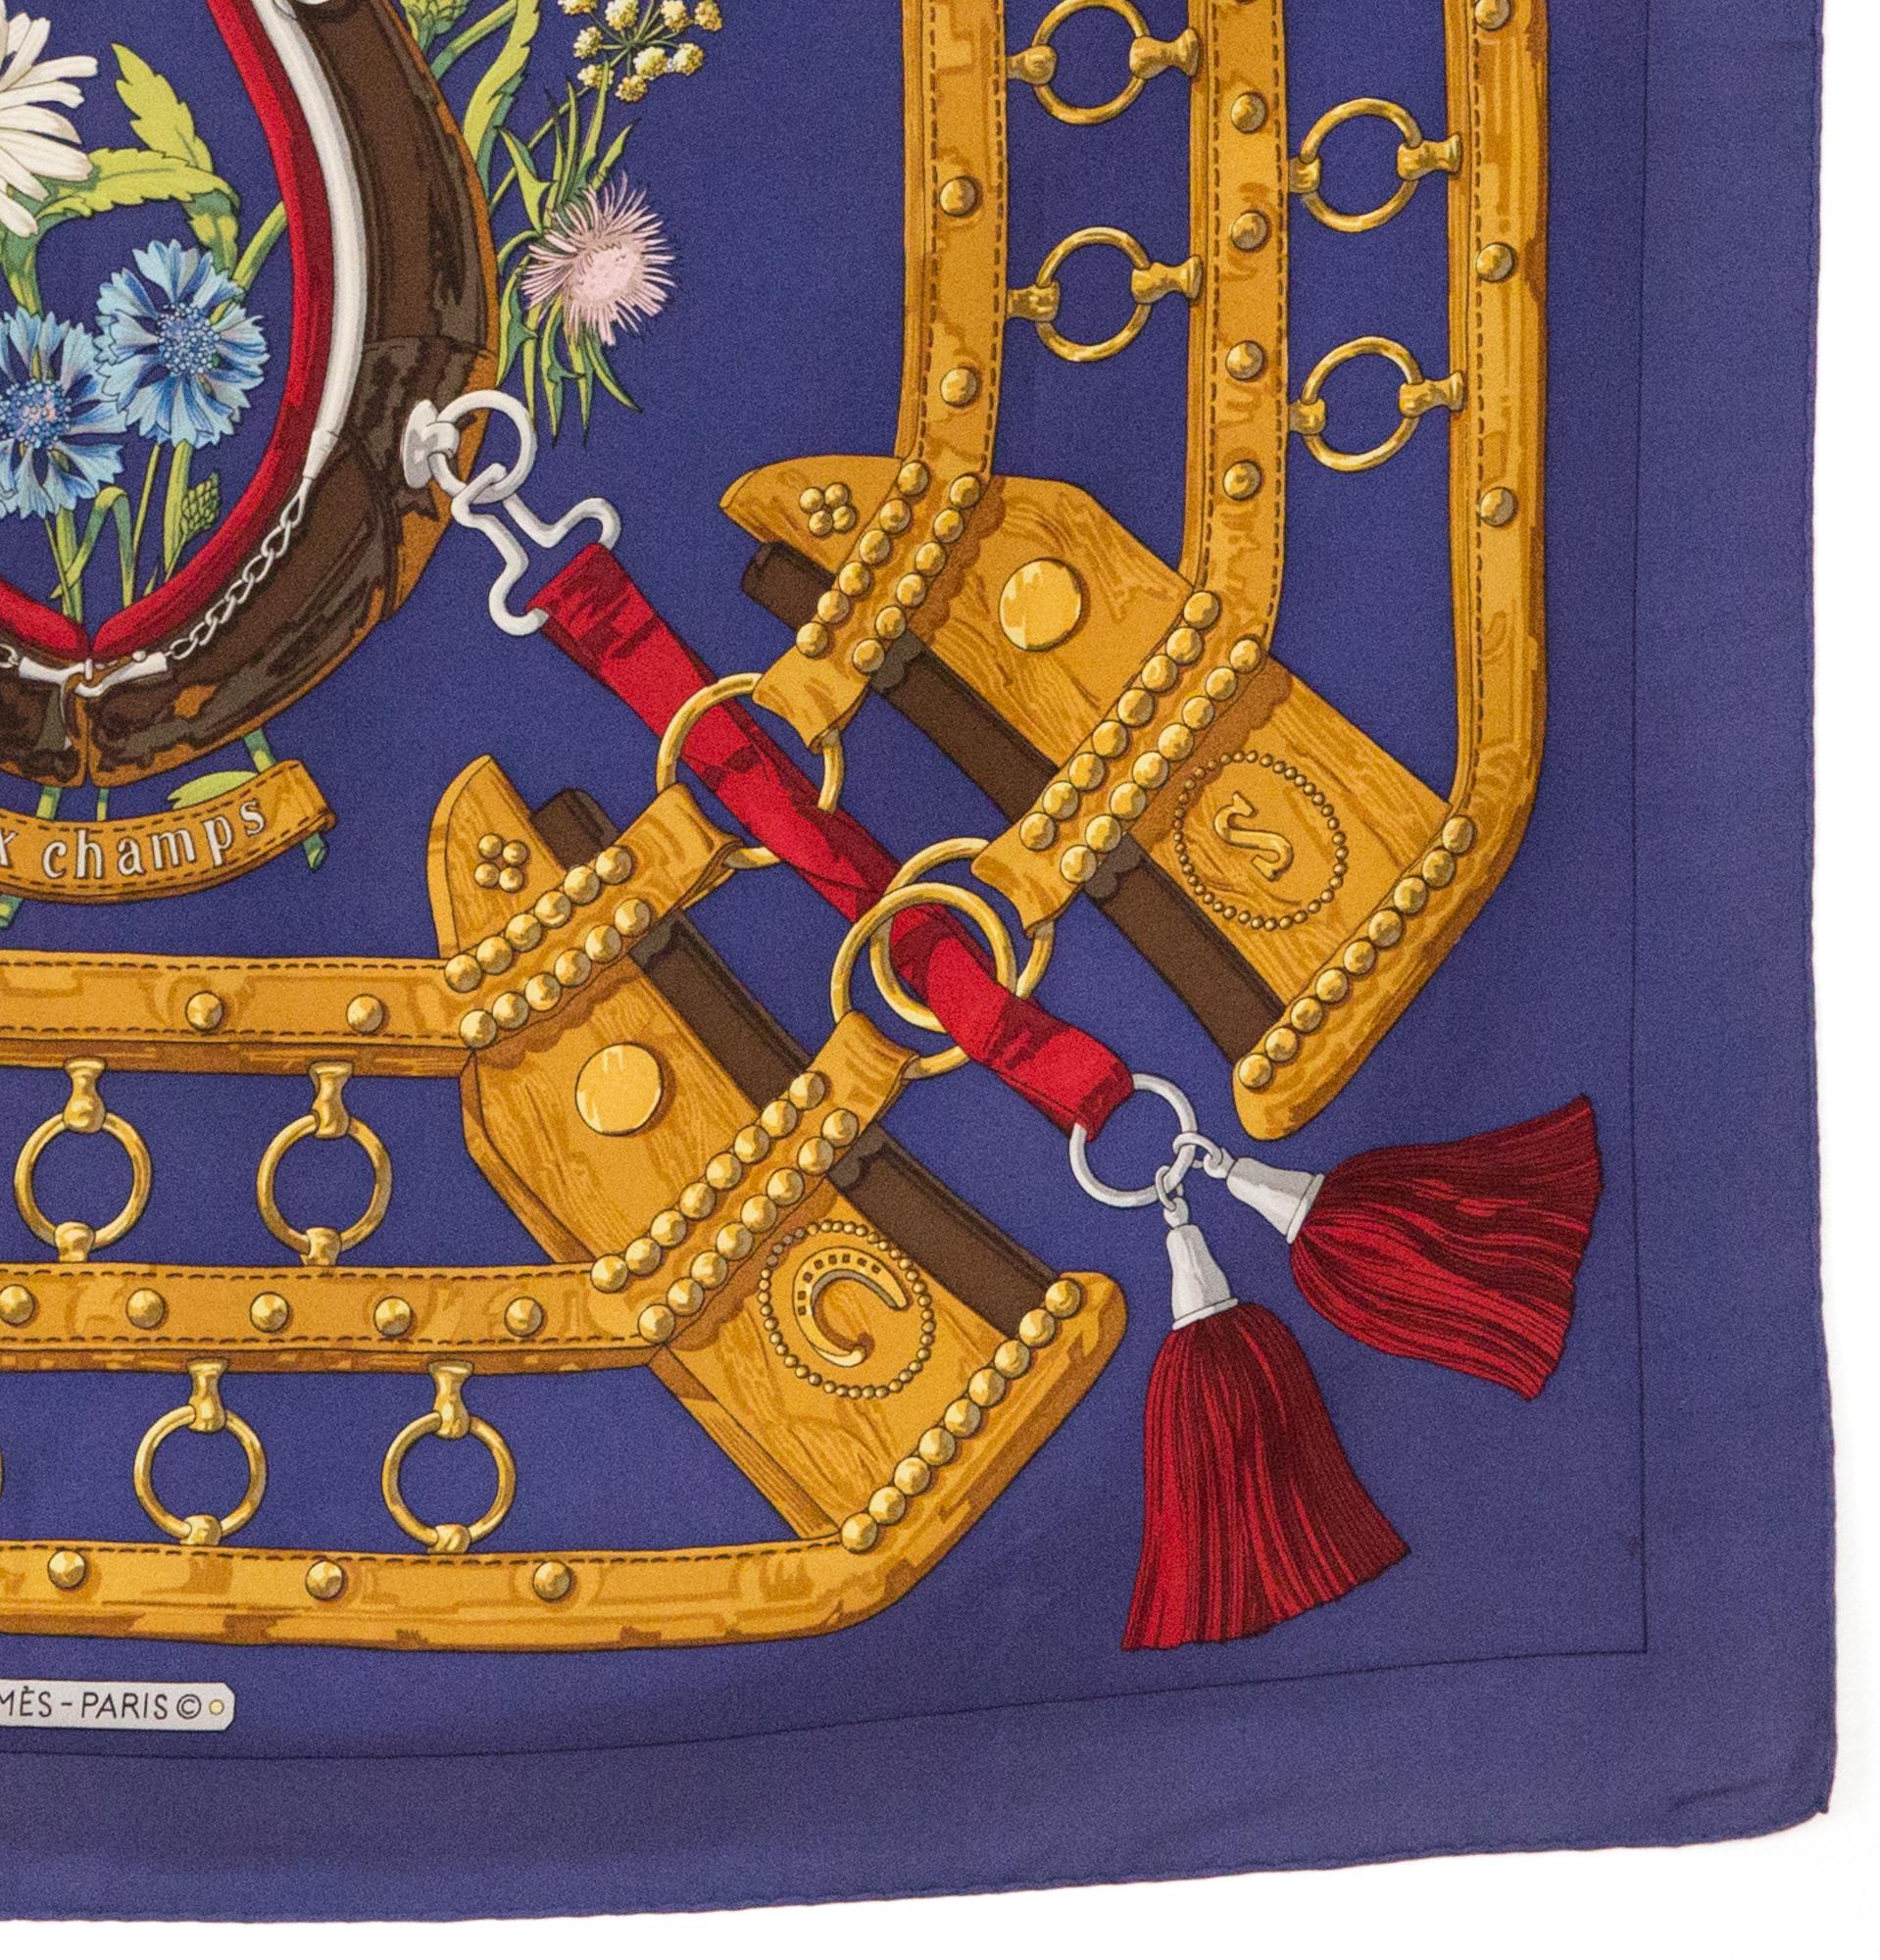 1990s Hermes Aux Champs by C Latham Silk Scarf In Good Condition For Sale In Paris, FR